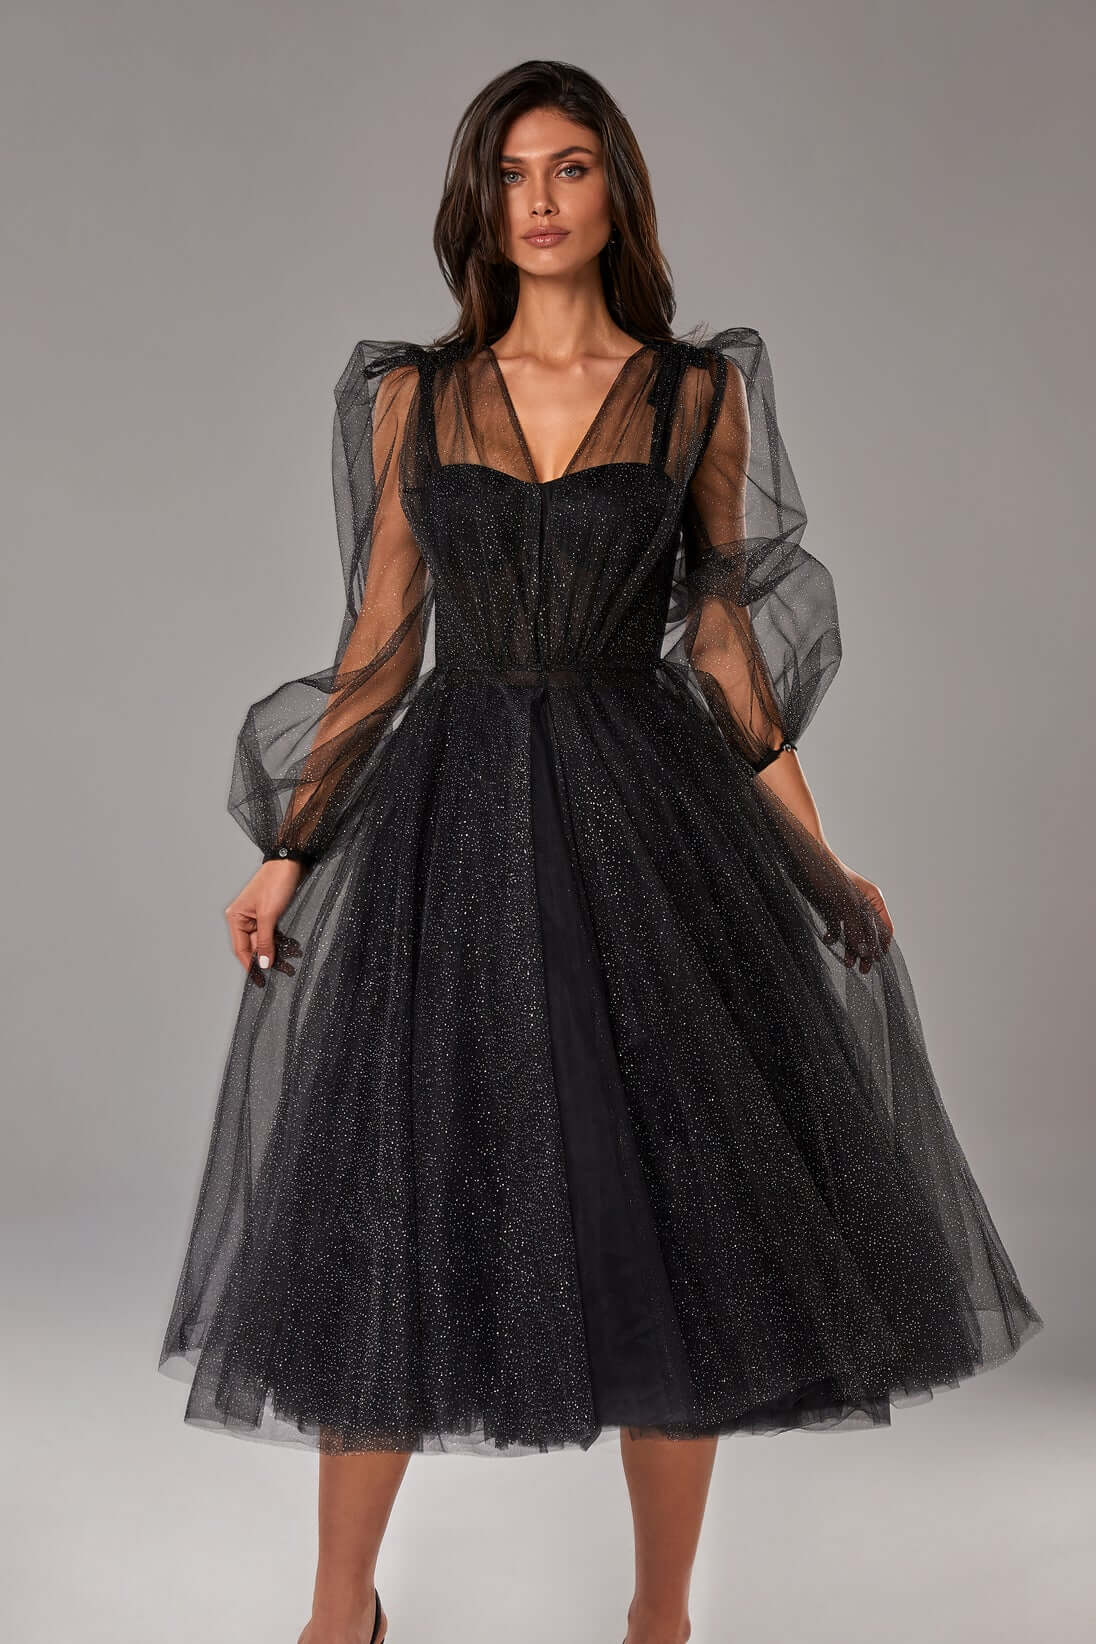 Combination sparkly tulle dress – Milla